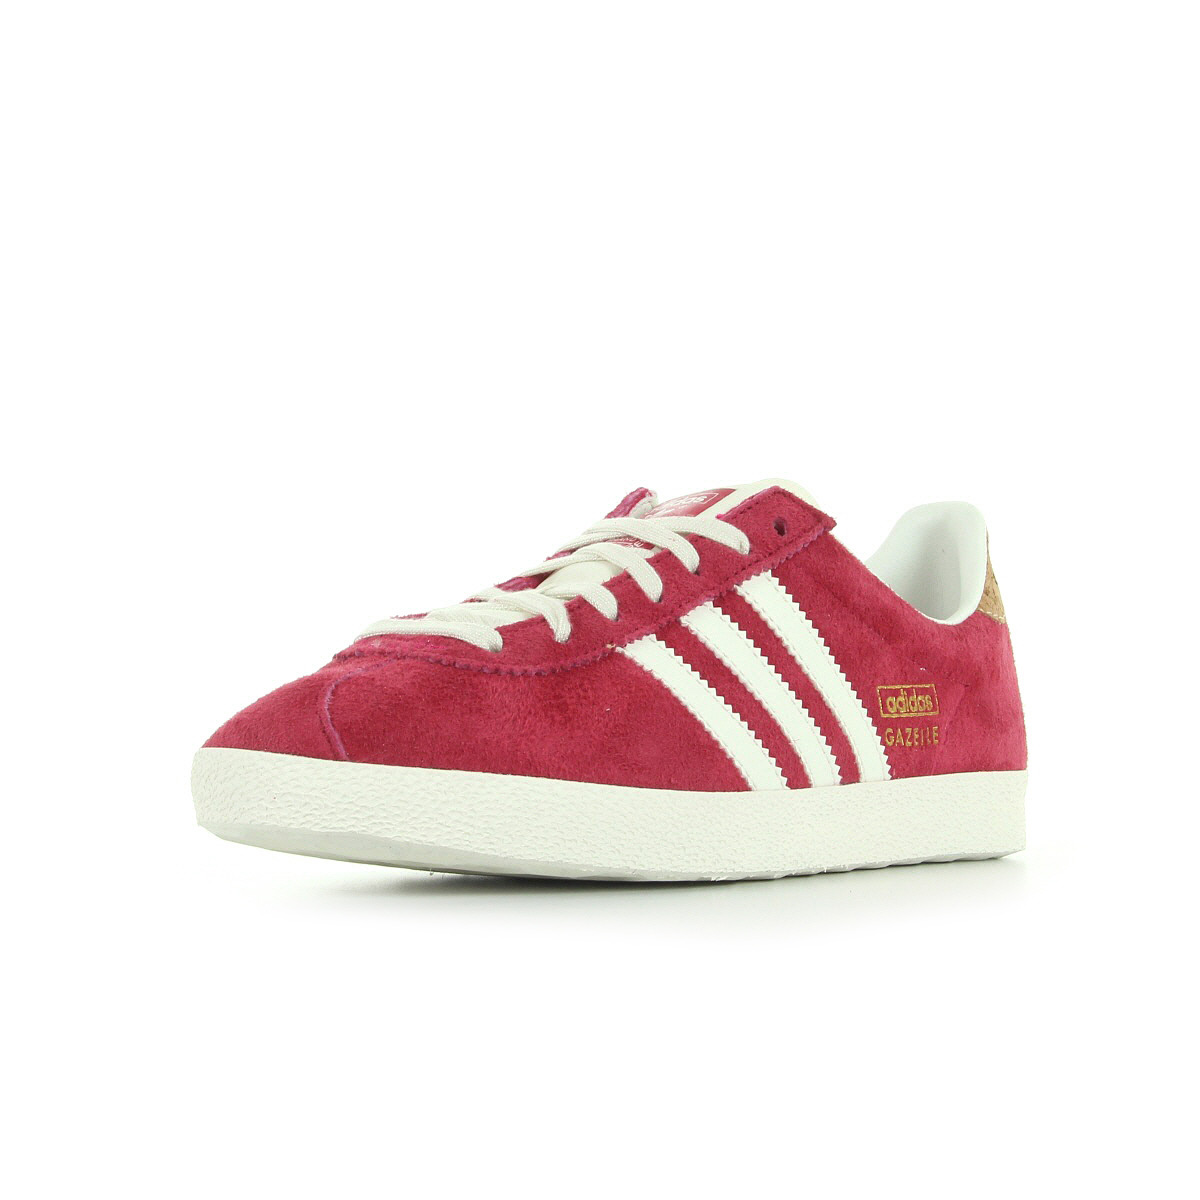 Chaussures baskets Adidas Femme Gazelle OG W taille Rose Cuir Lacets